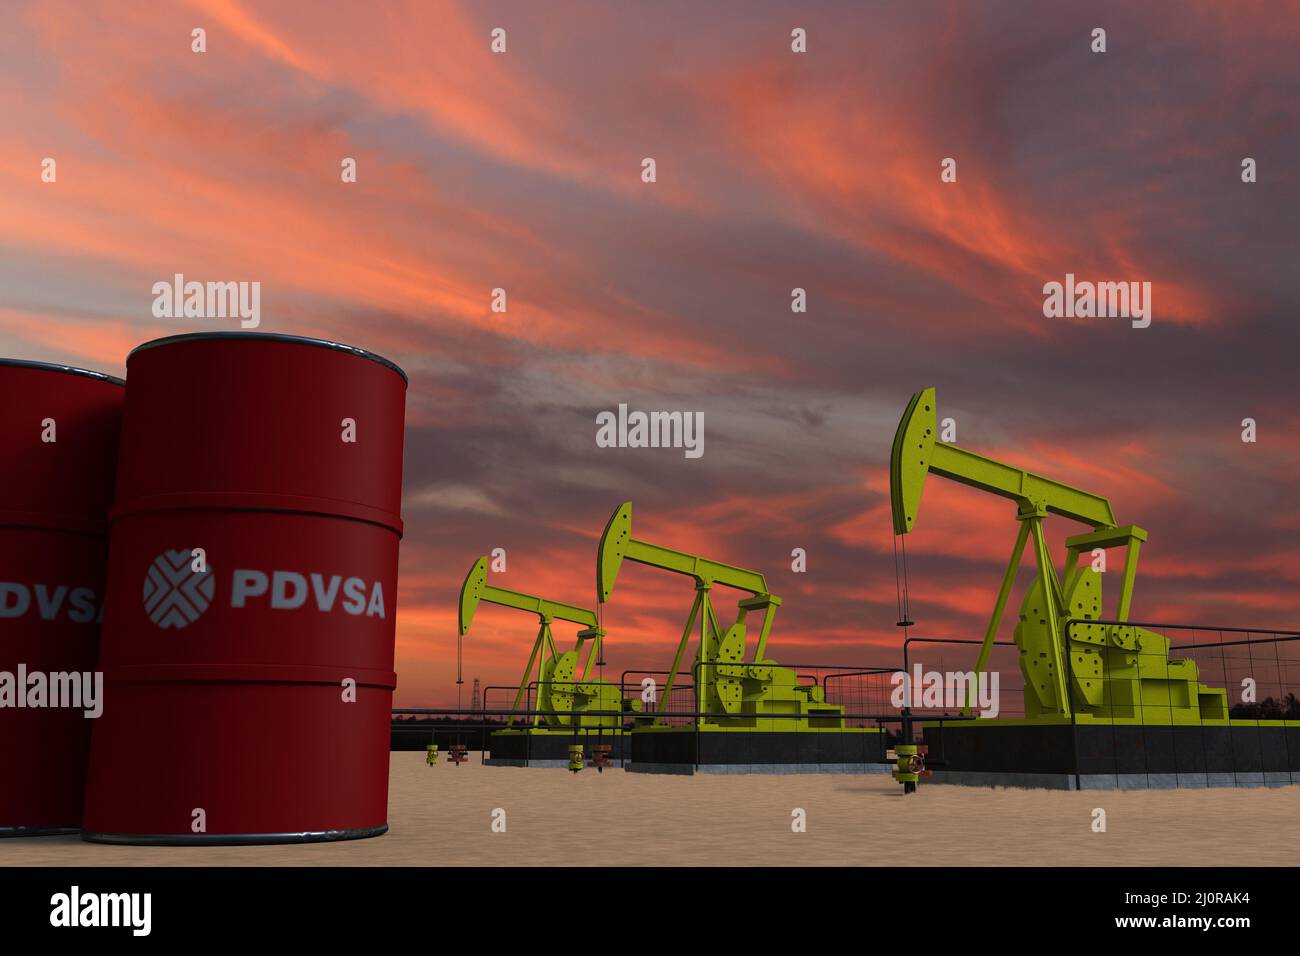 Nice pumpjack oil extraction and cloudy sky in sunset with the PDVSA VENEZUELA Opec flag Organization of the Petroleum Exporting Countries oil barrels Stock Photo